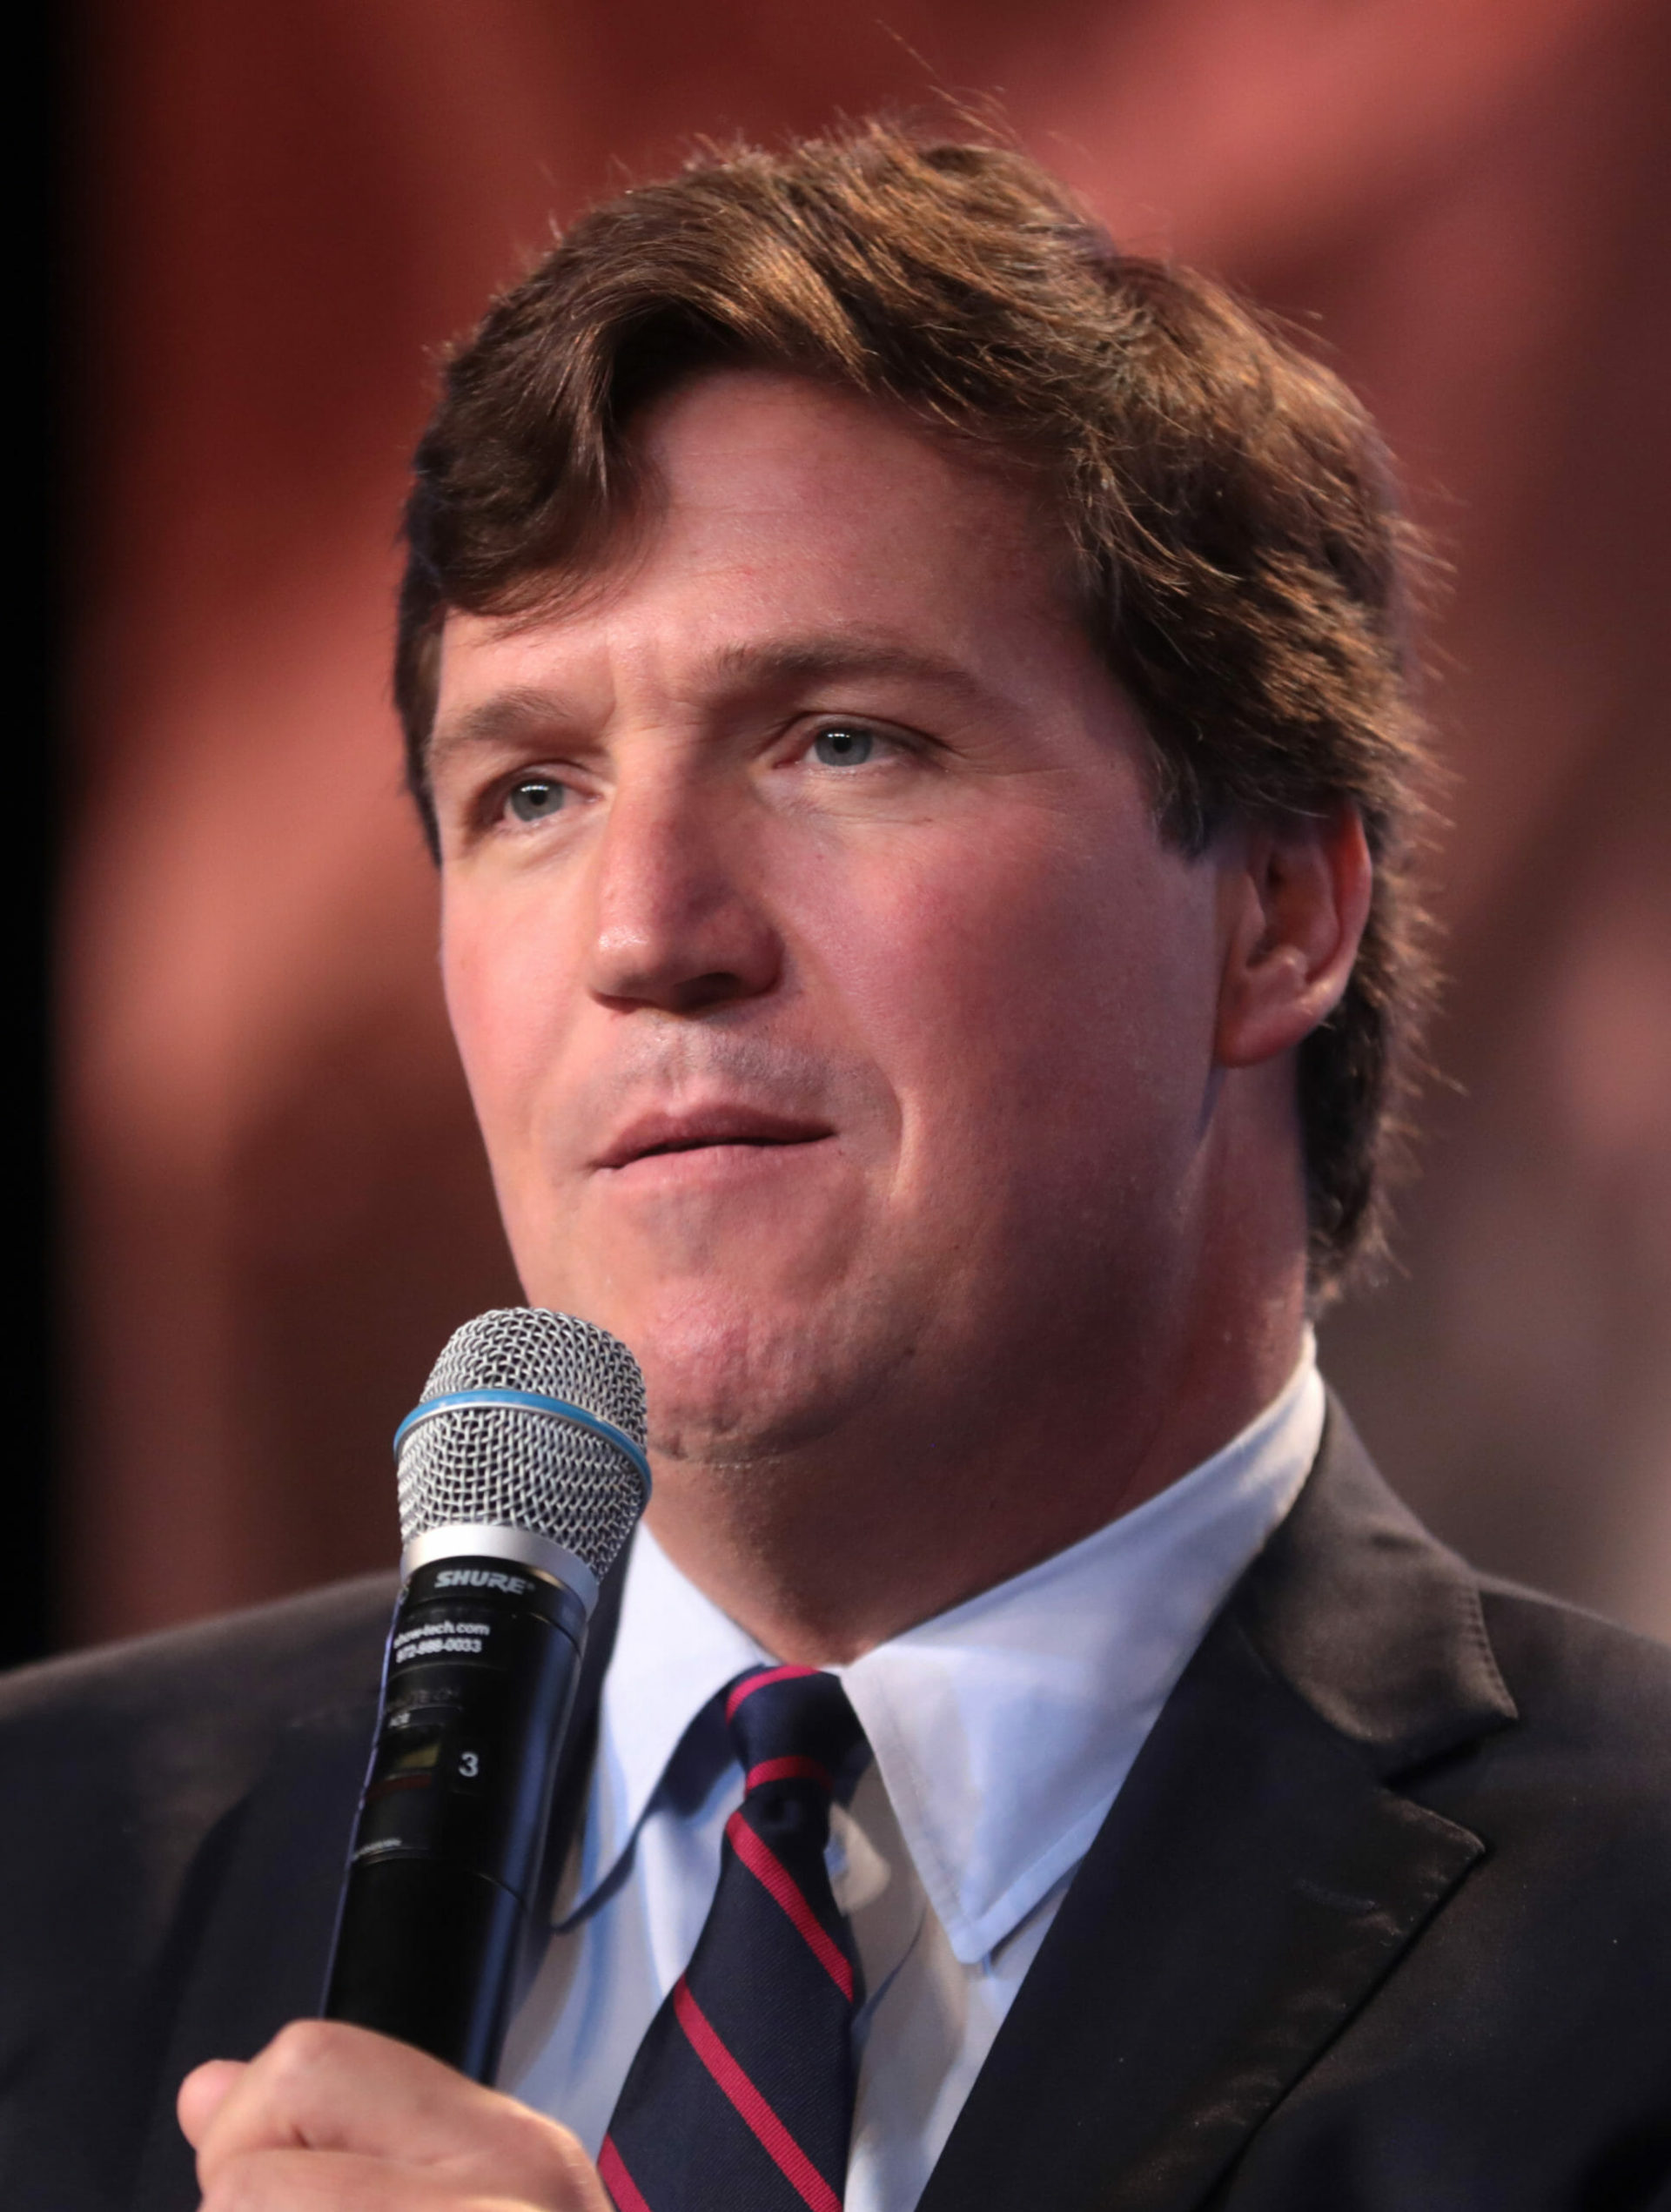 The personal life of Tucker Carlson, the host of the mostwatched show "Tucker Carlson Tonight"